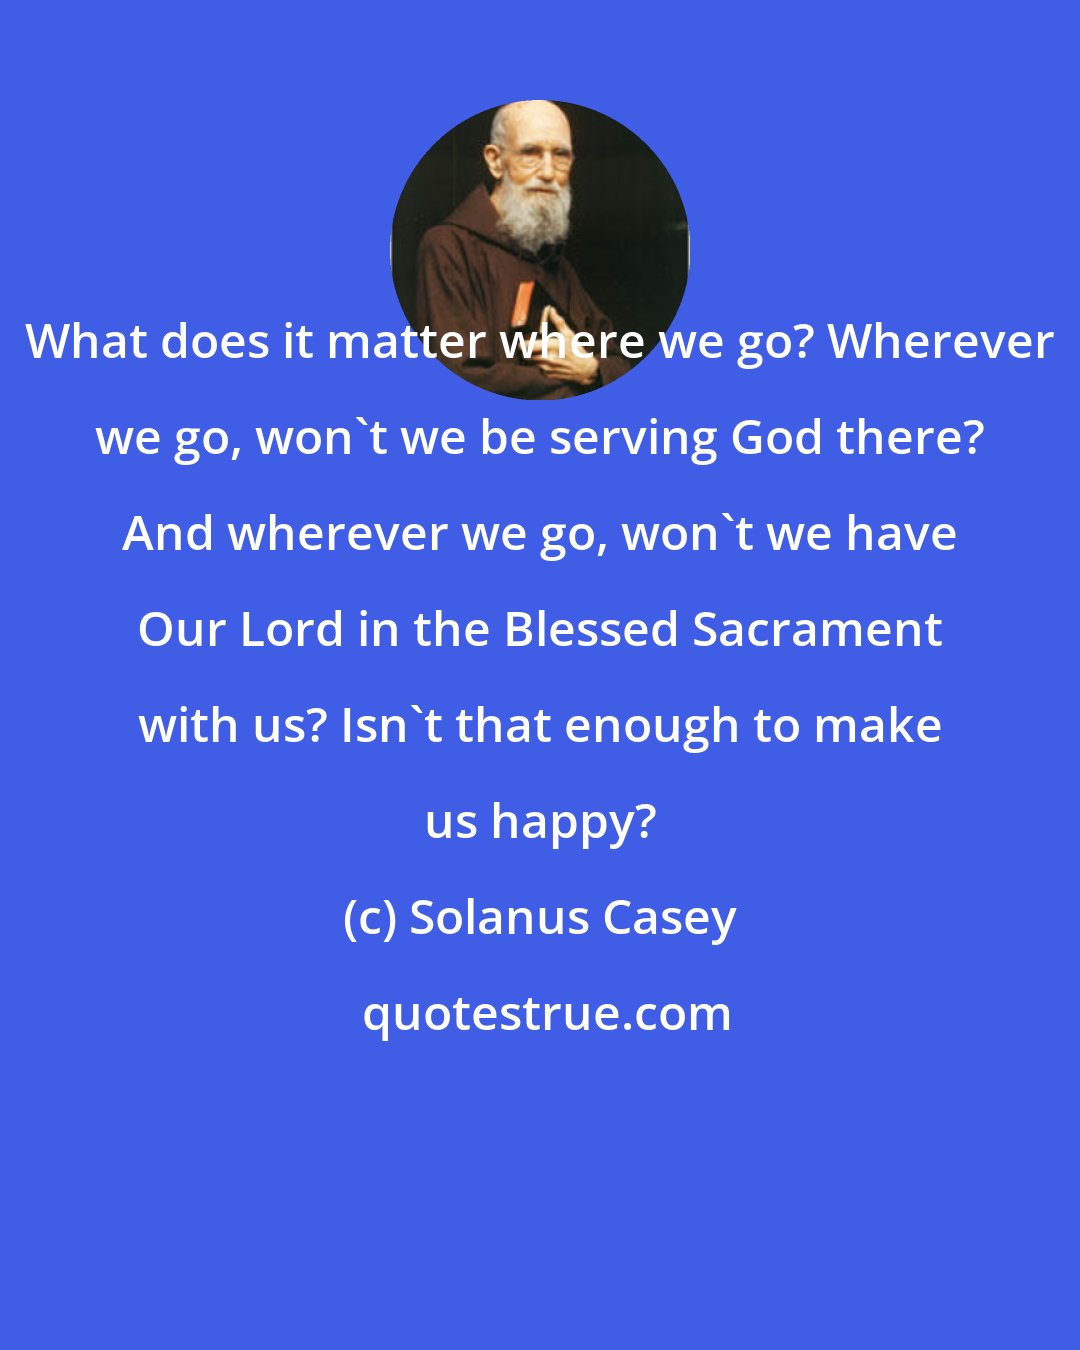 Solanus Casey: What does it matter where we go? Wherever we go, won't we be serving God there? And wherever we go, won't we have Our Lord in the Blessed Sacrament with us? Isn't that enough to make us happy?